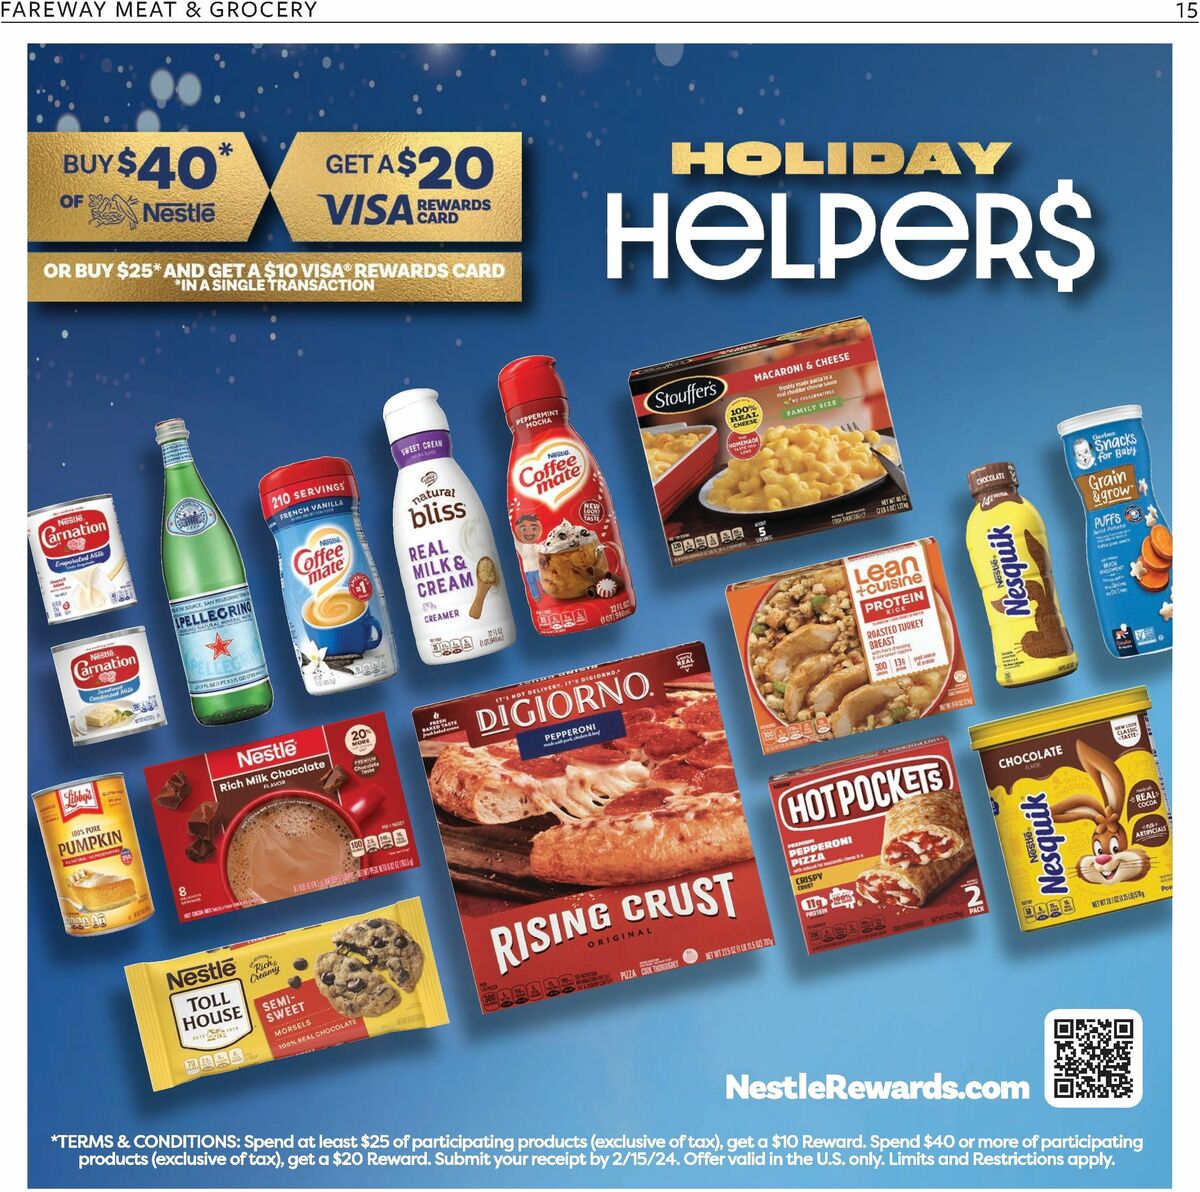 Fareway Weekly Ad from December 11